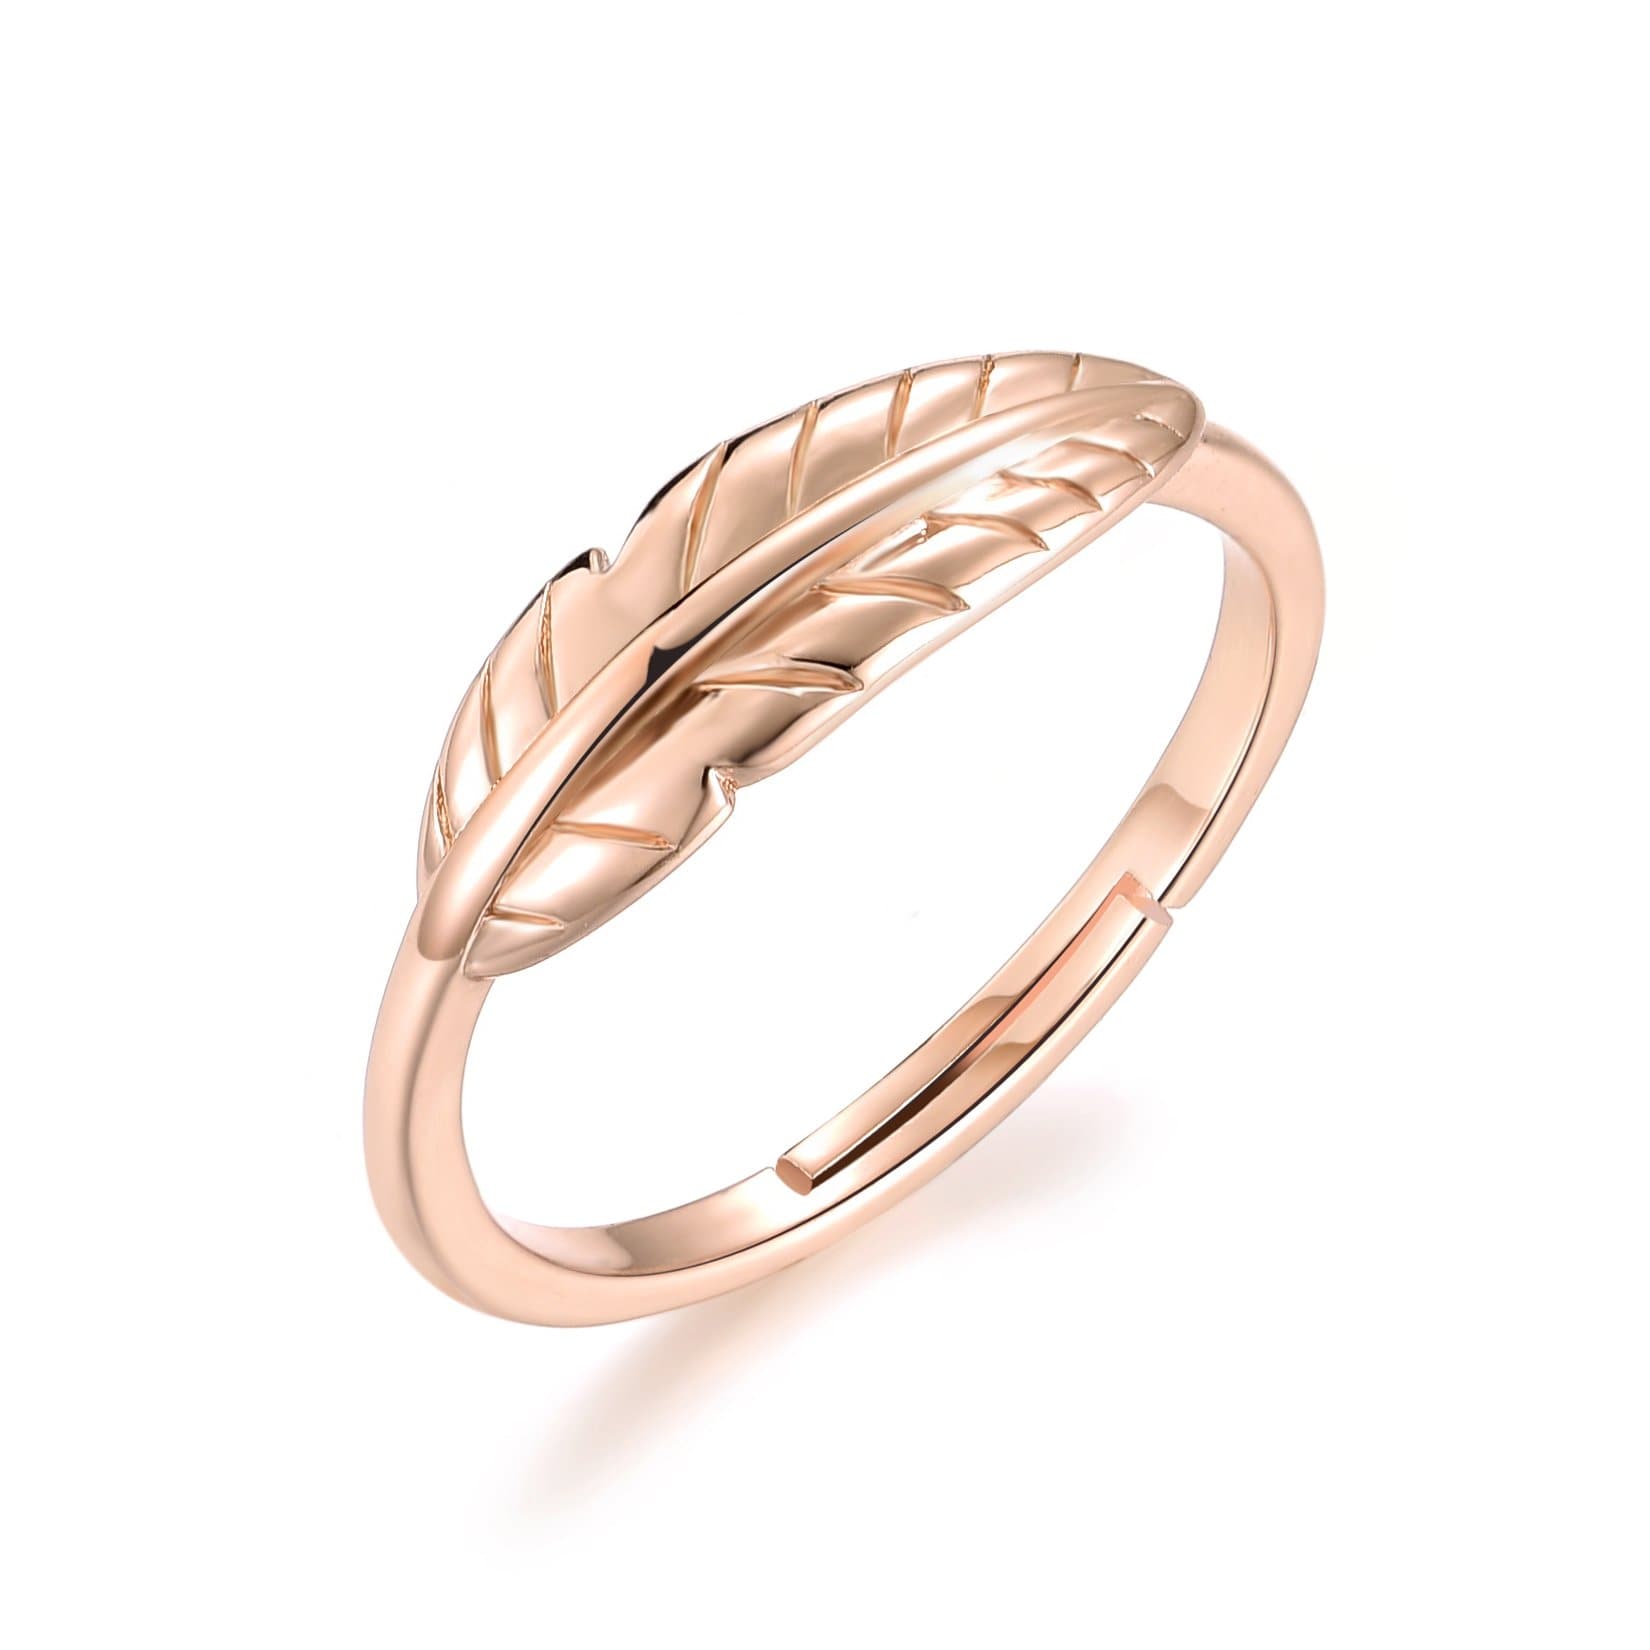 Rose Gold Plated Adjustable Feather Ring by Philip Jones Jewellery